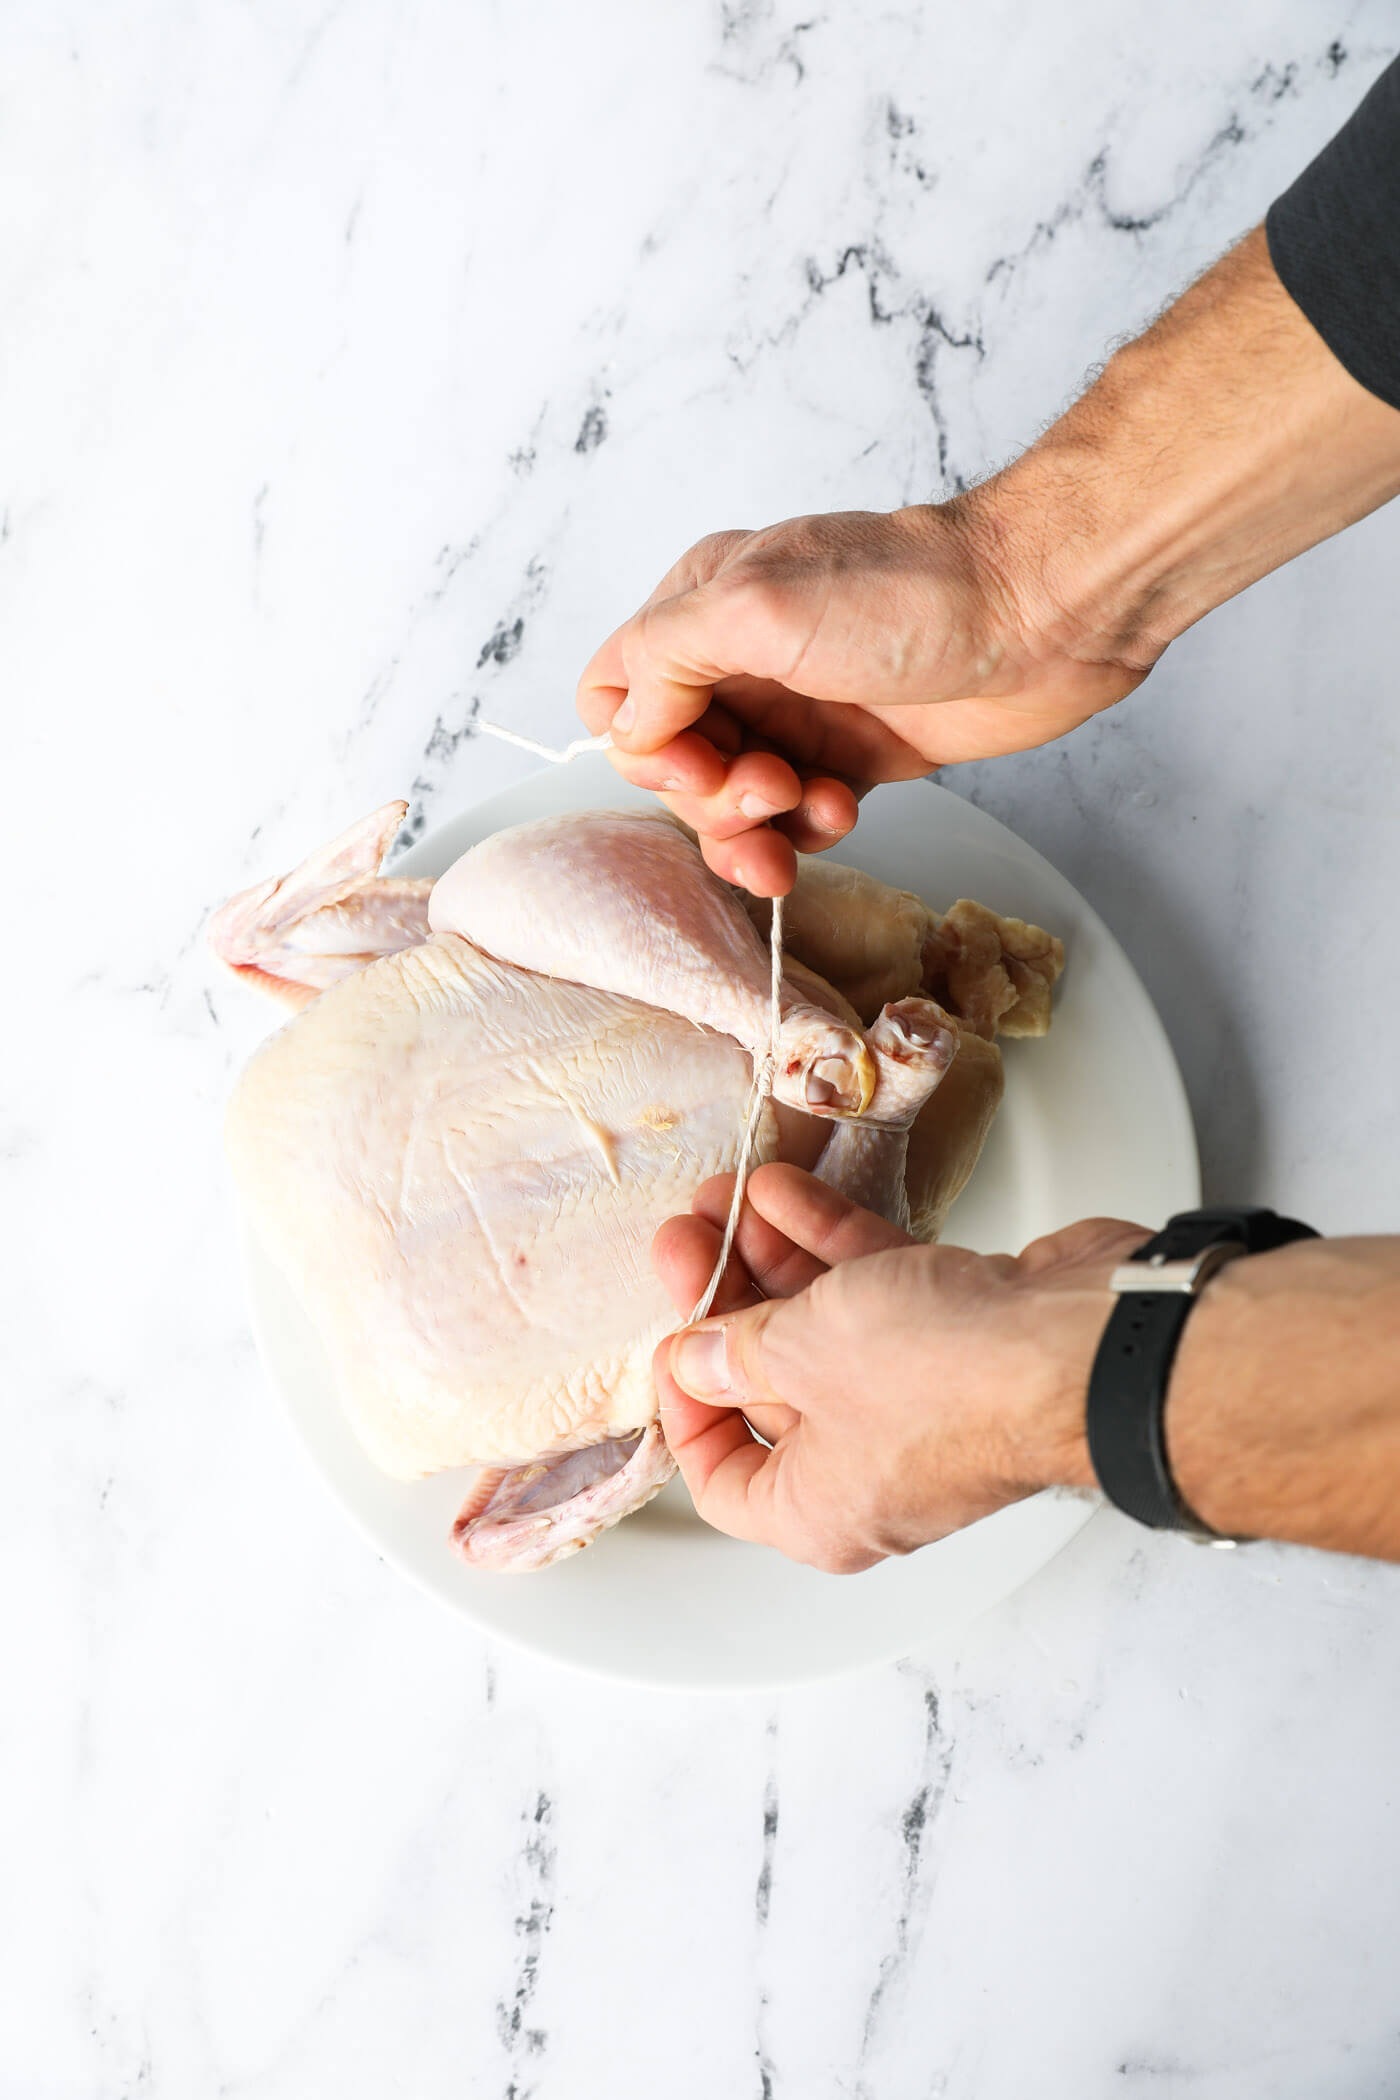 Overhead image of hands tying twine around the legs of a raw whole chicken.